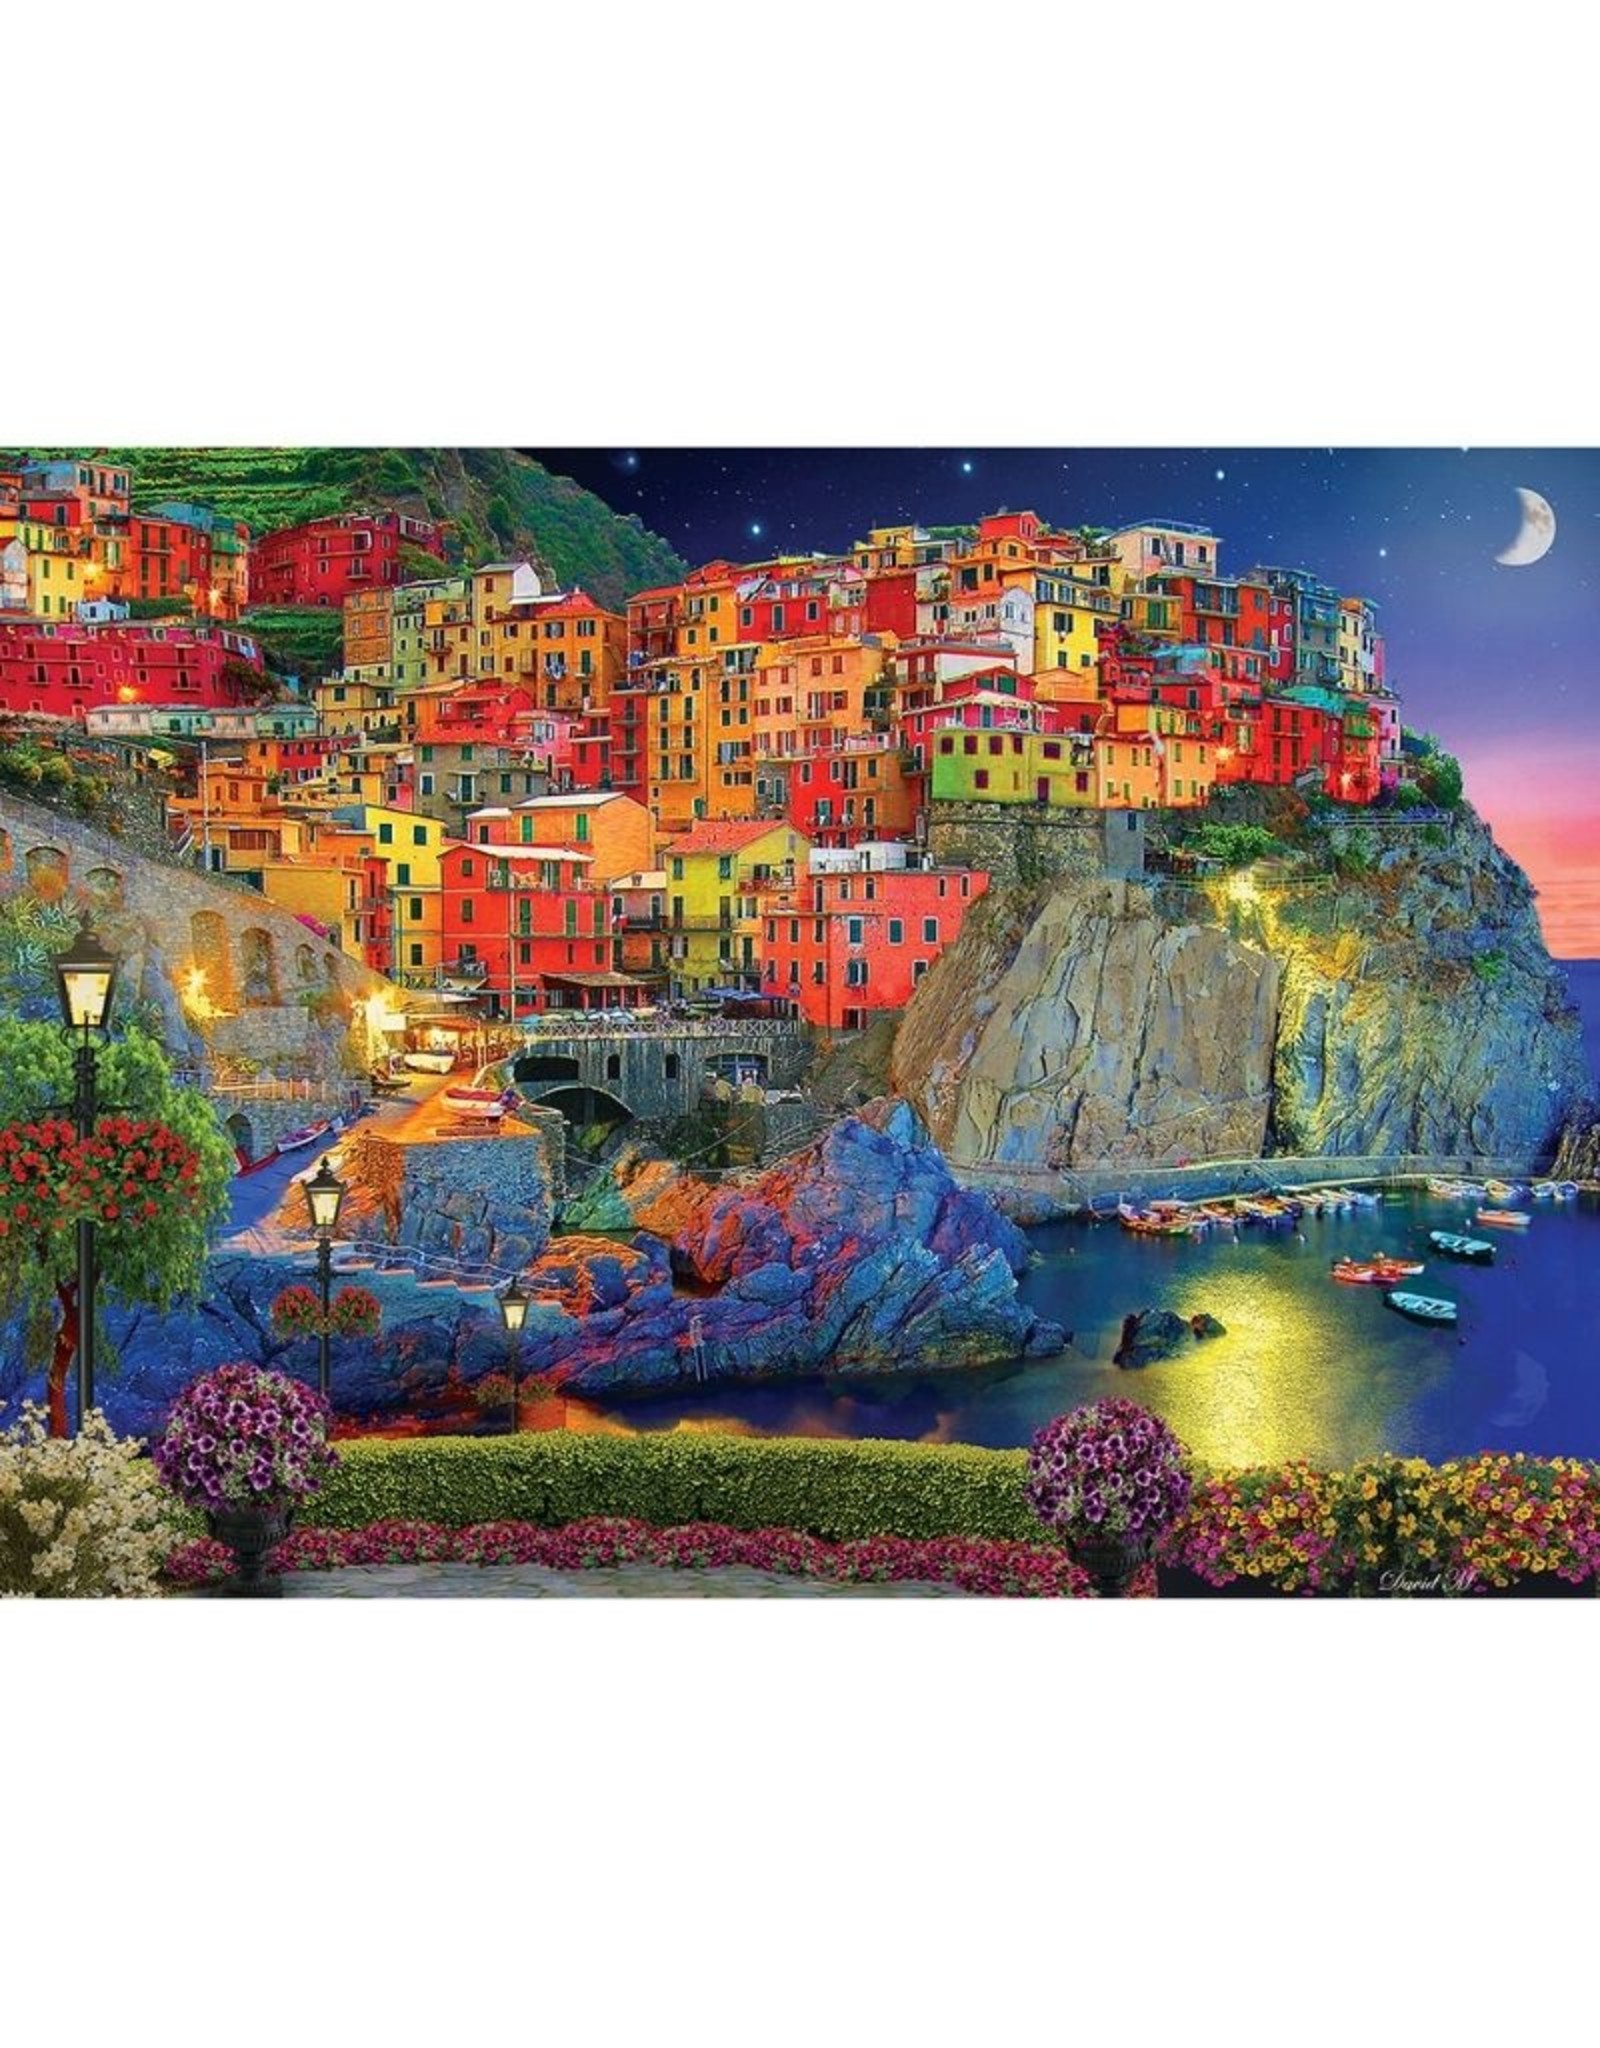 Colorscapes Evening Glow 1000pc Family Fun Hobbies